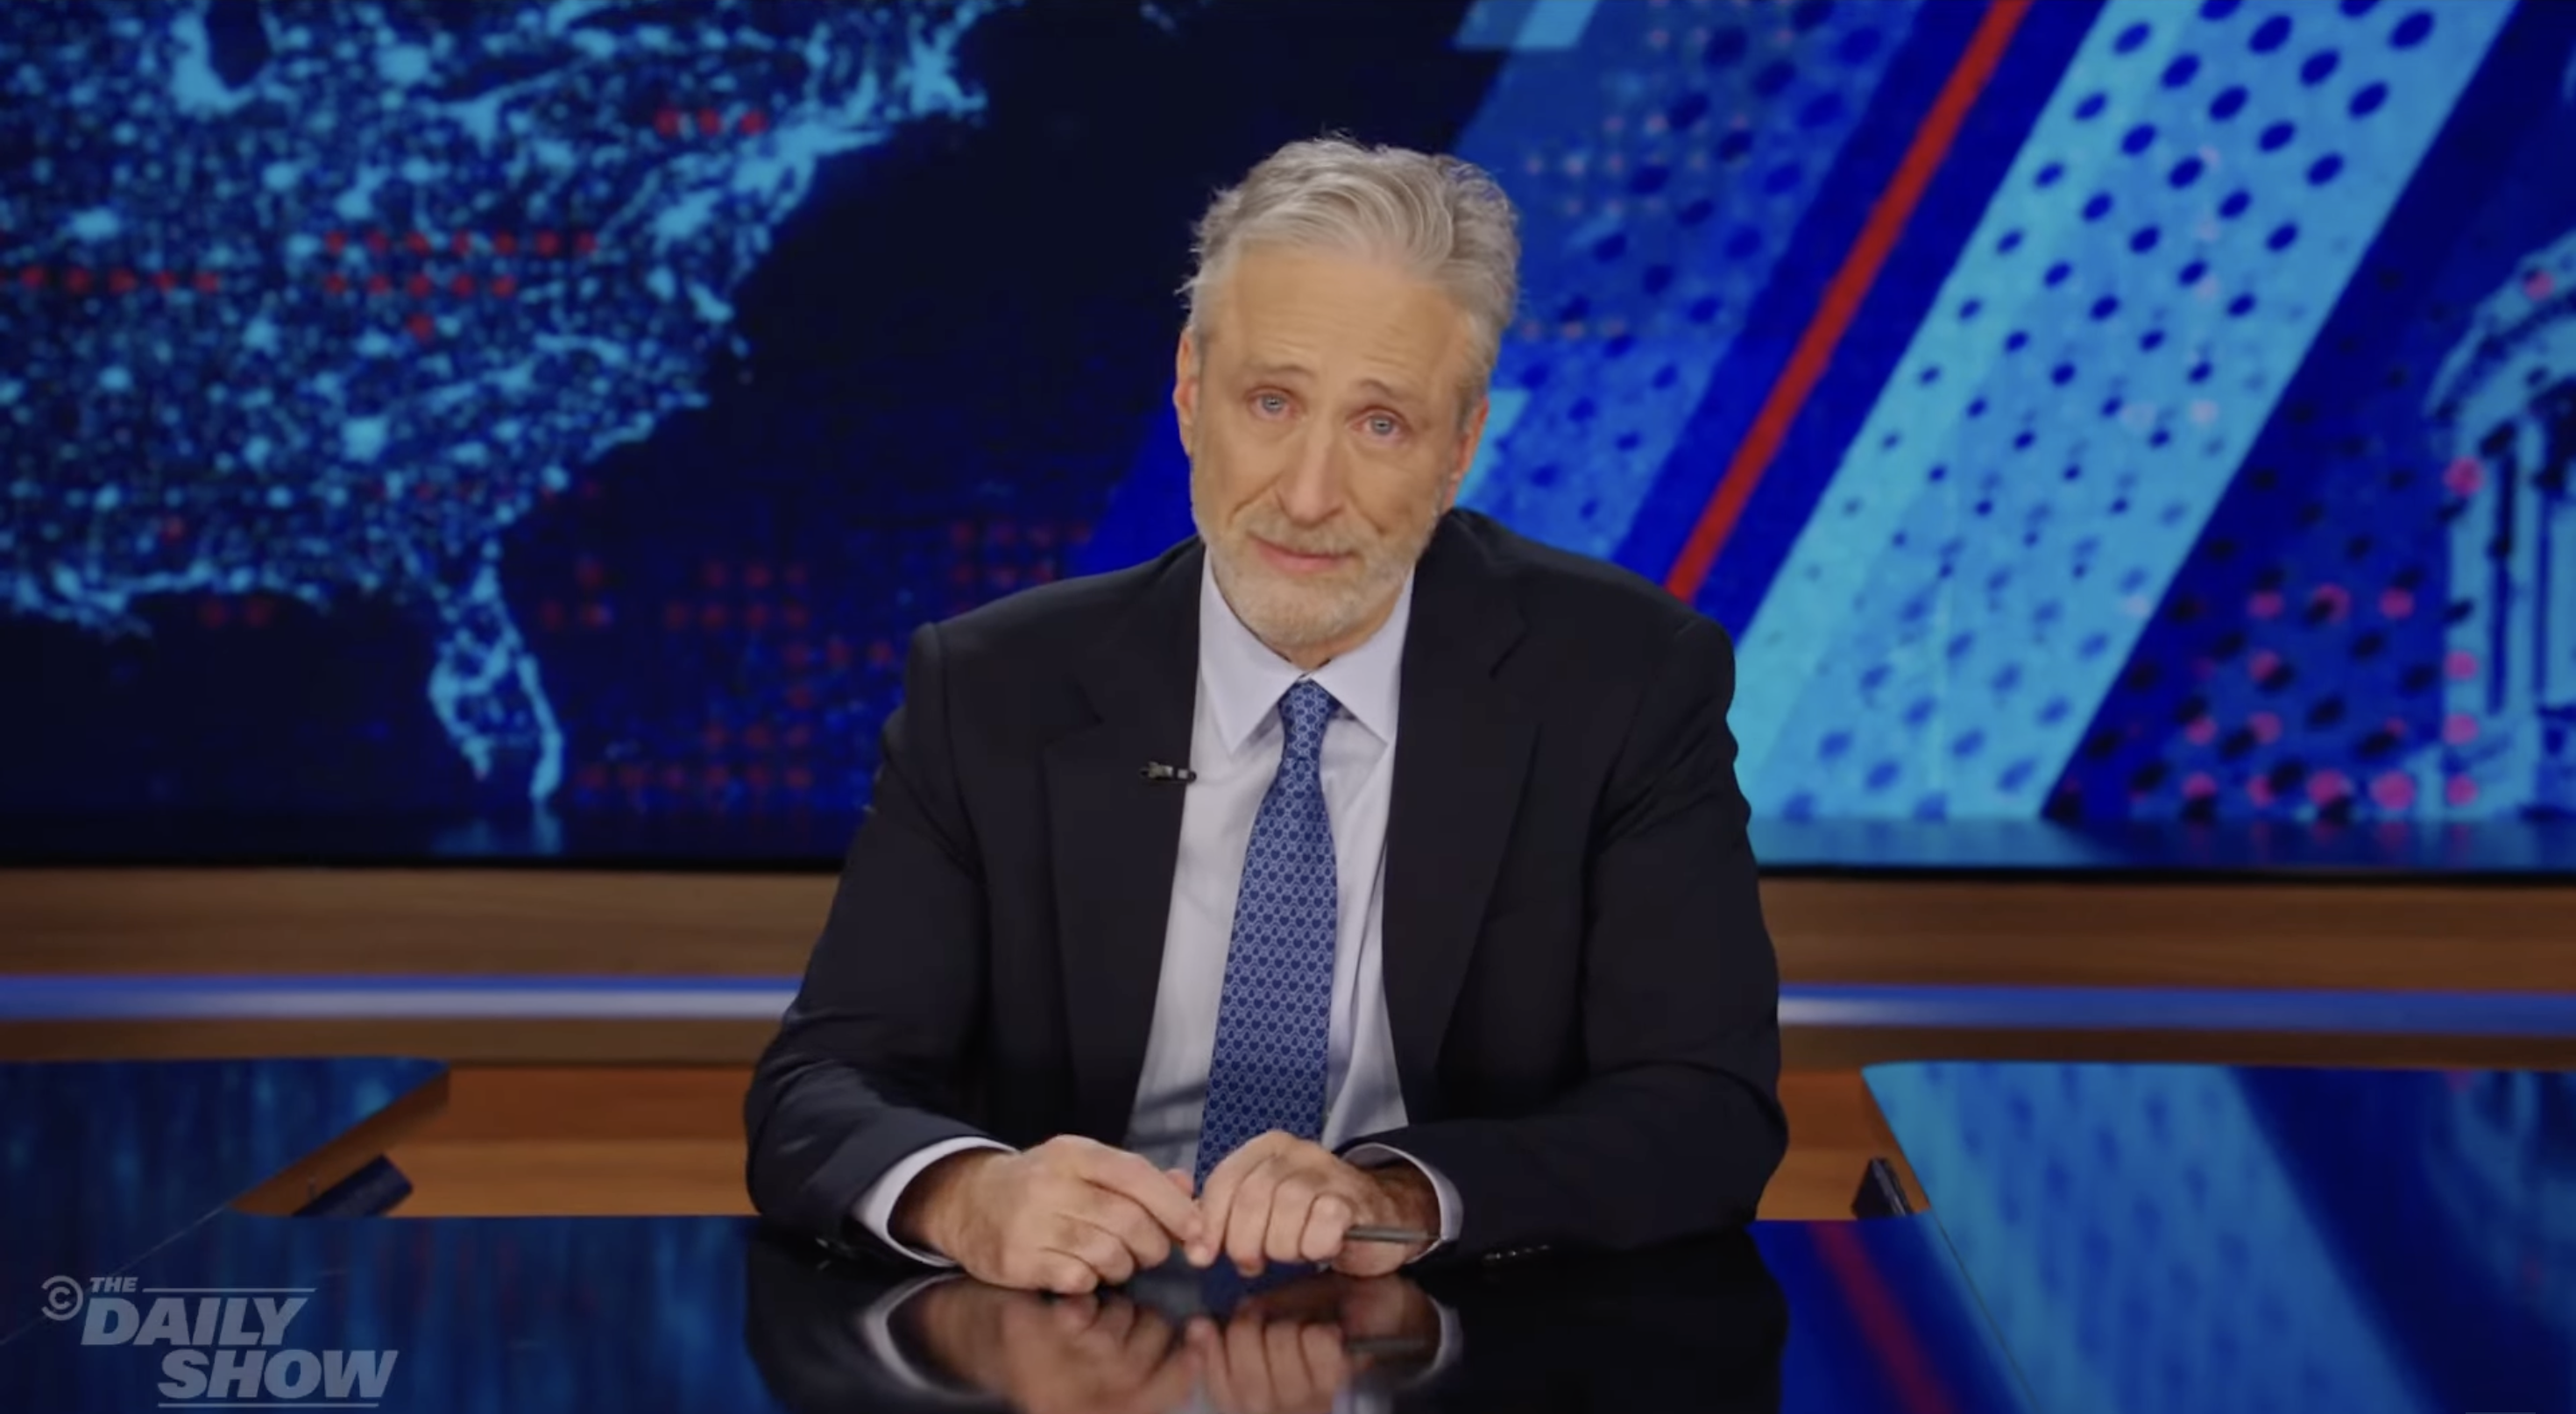 Jon Stewart in a suit hosts &quot;The Daily Show,&quot; sitting at a desk with the show&#x27;s graphics in the background